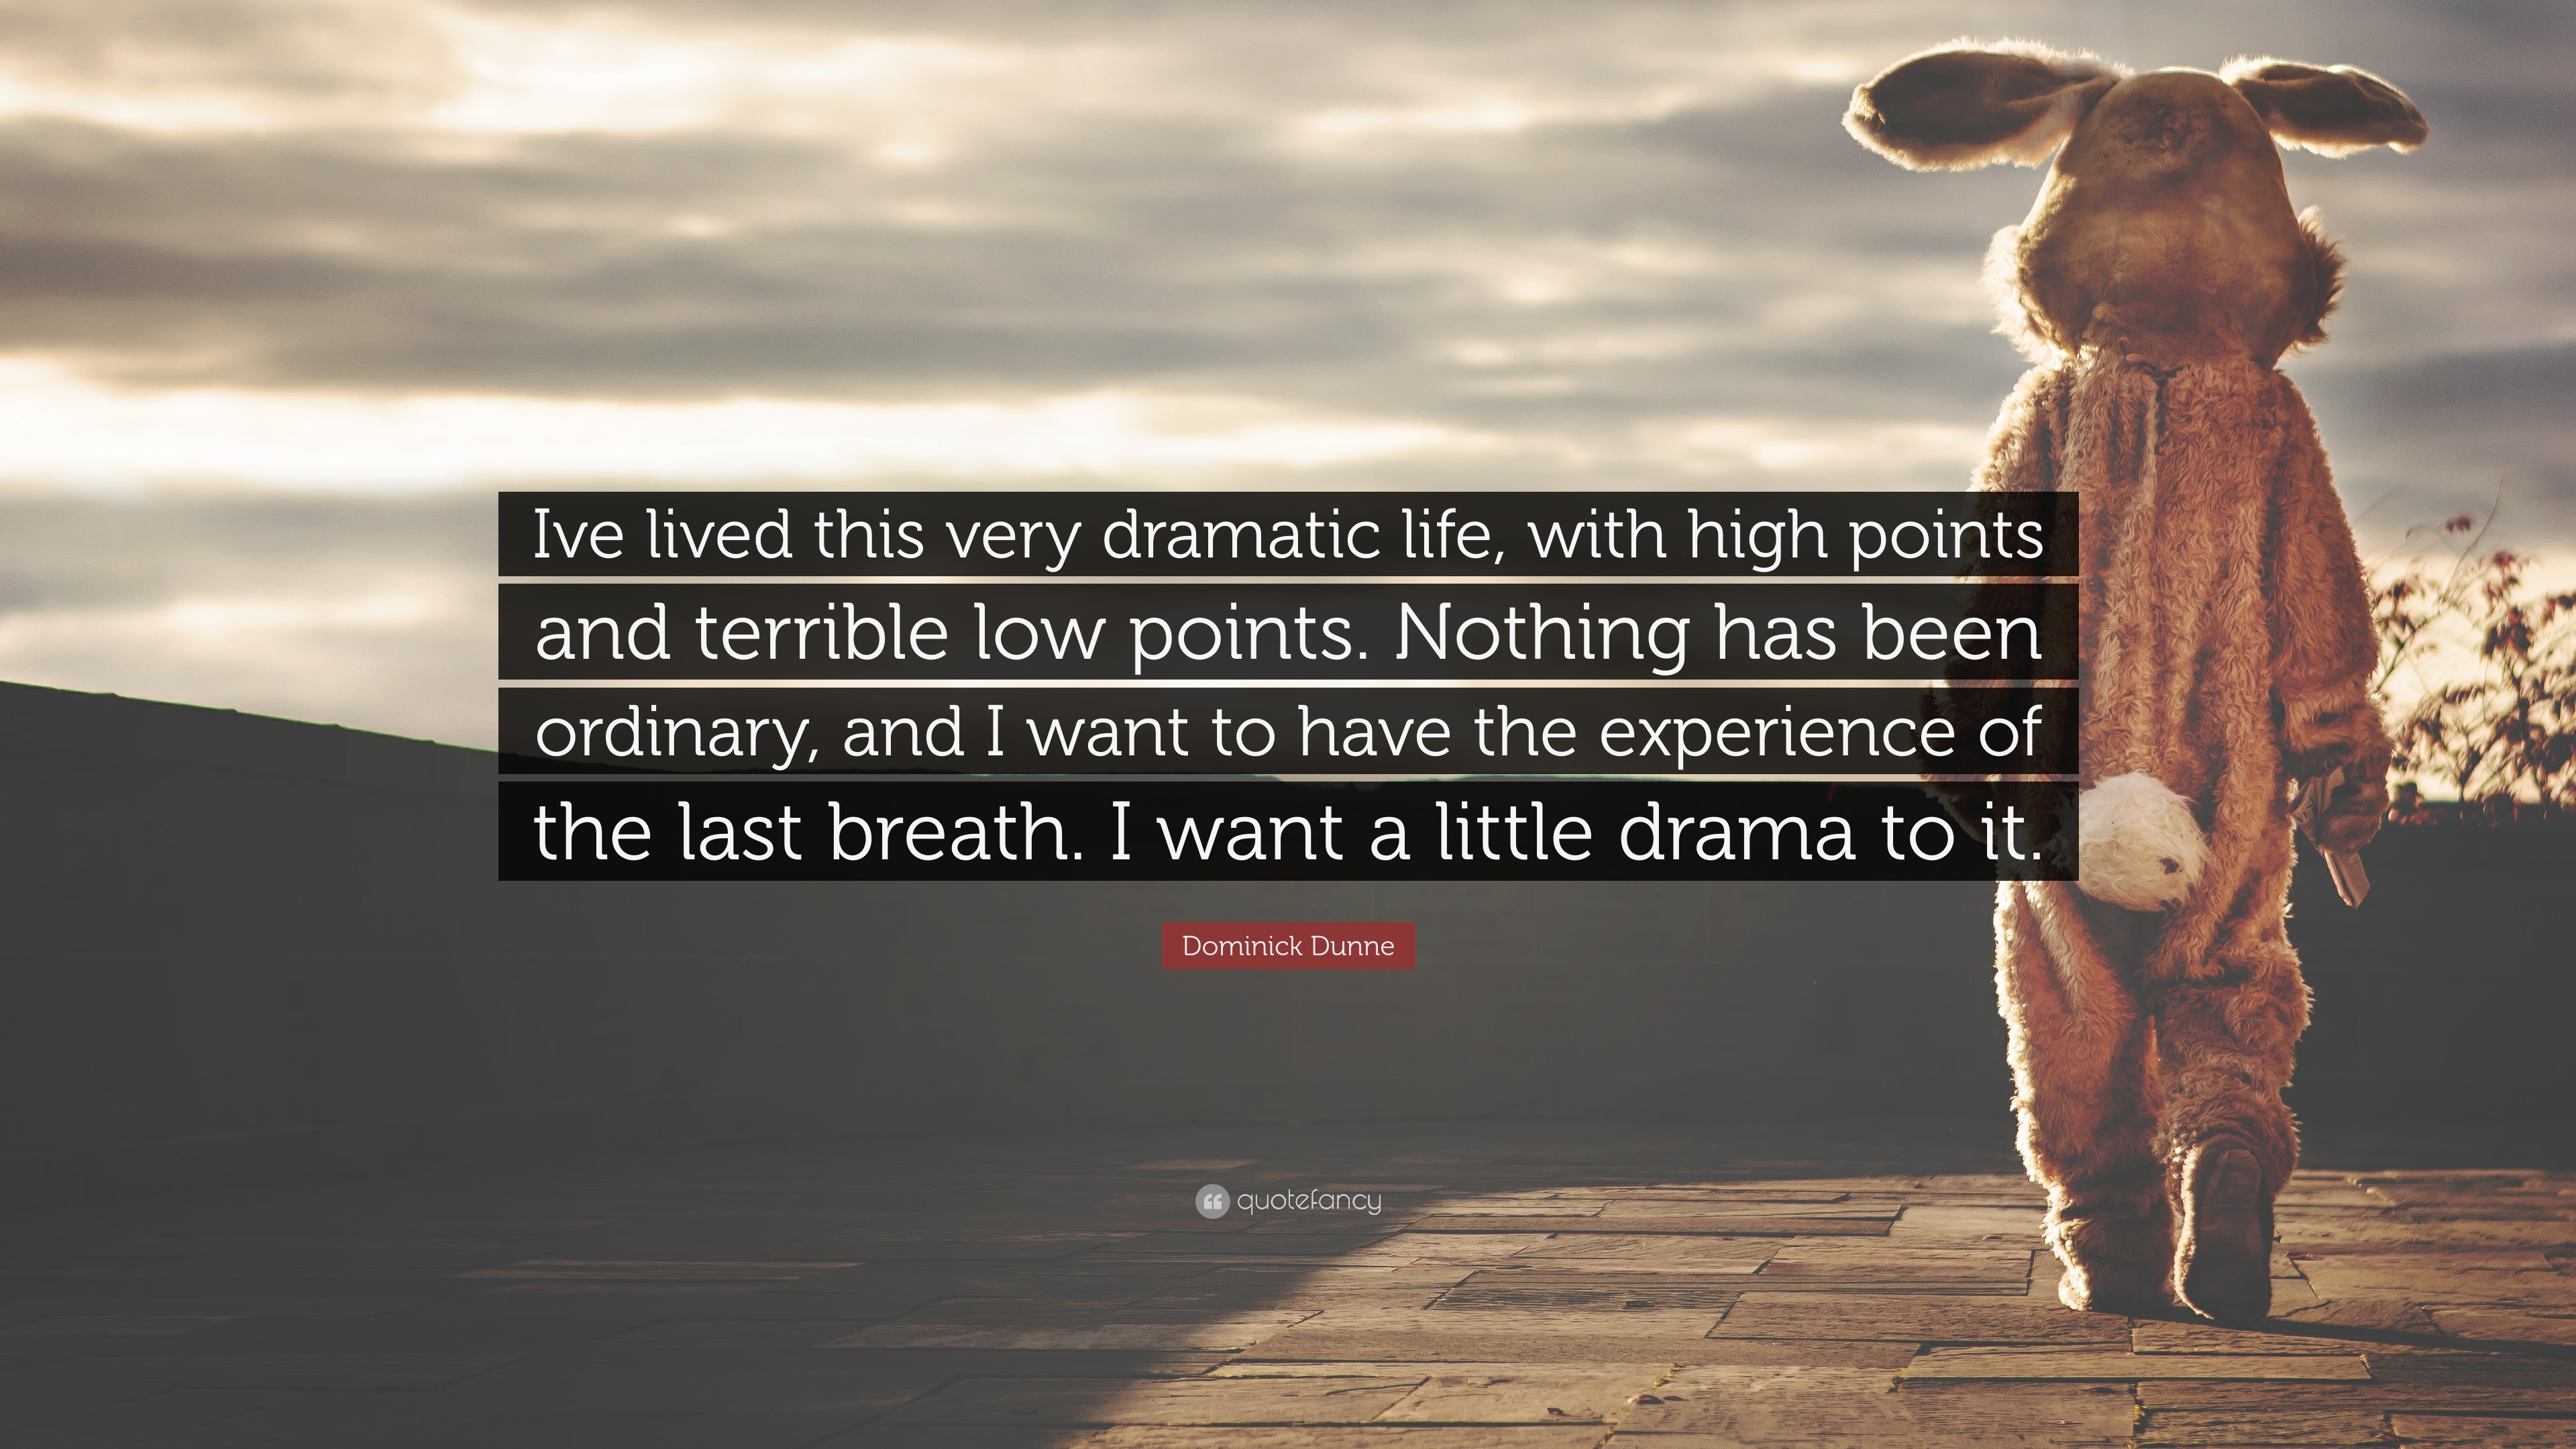 Dominick Dunne Quote Ive Lived This Very Dramatic Life With High Points And Terrible Low Points Nothing Has Been Ordinary And I Want To Ha